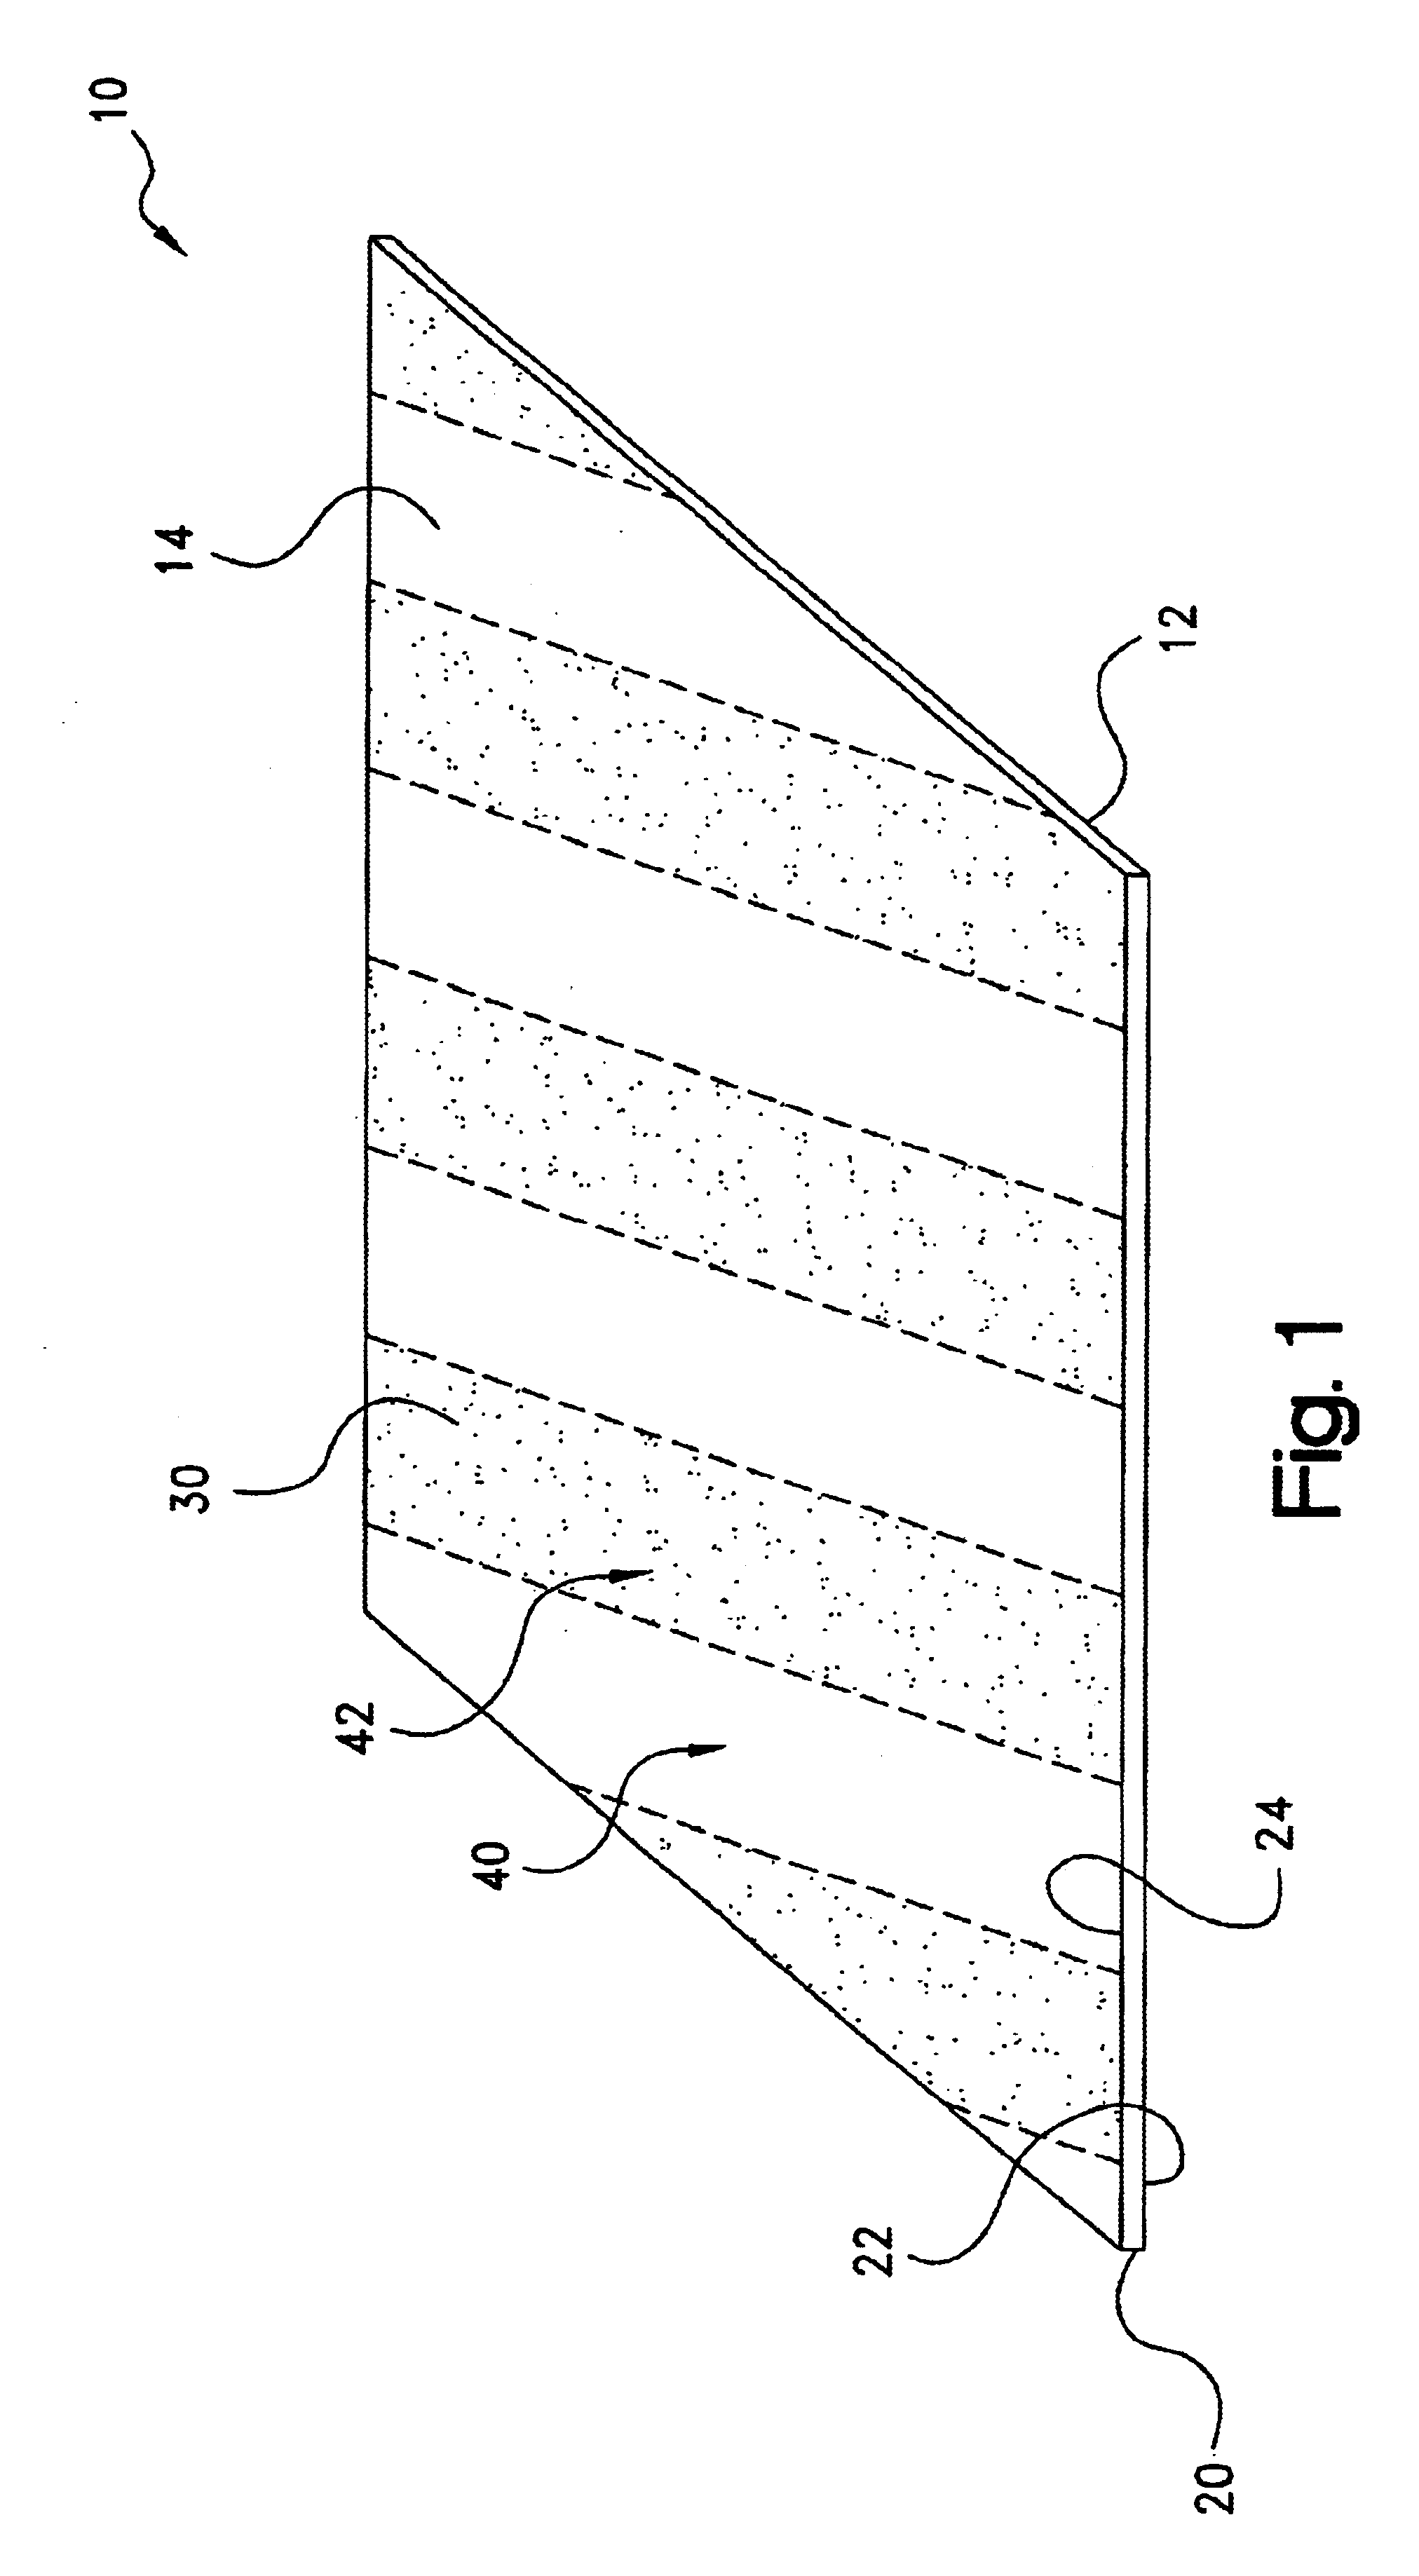 Thermal interface material having a zone-coated release linear